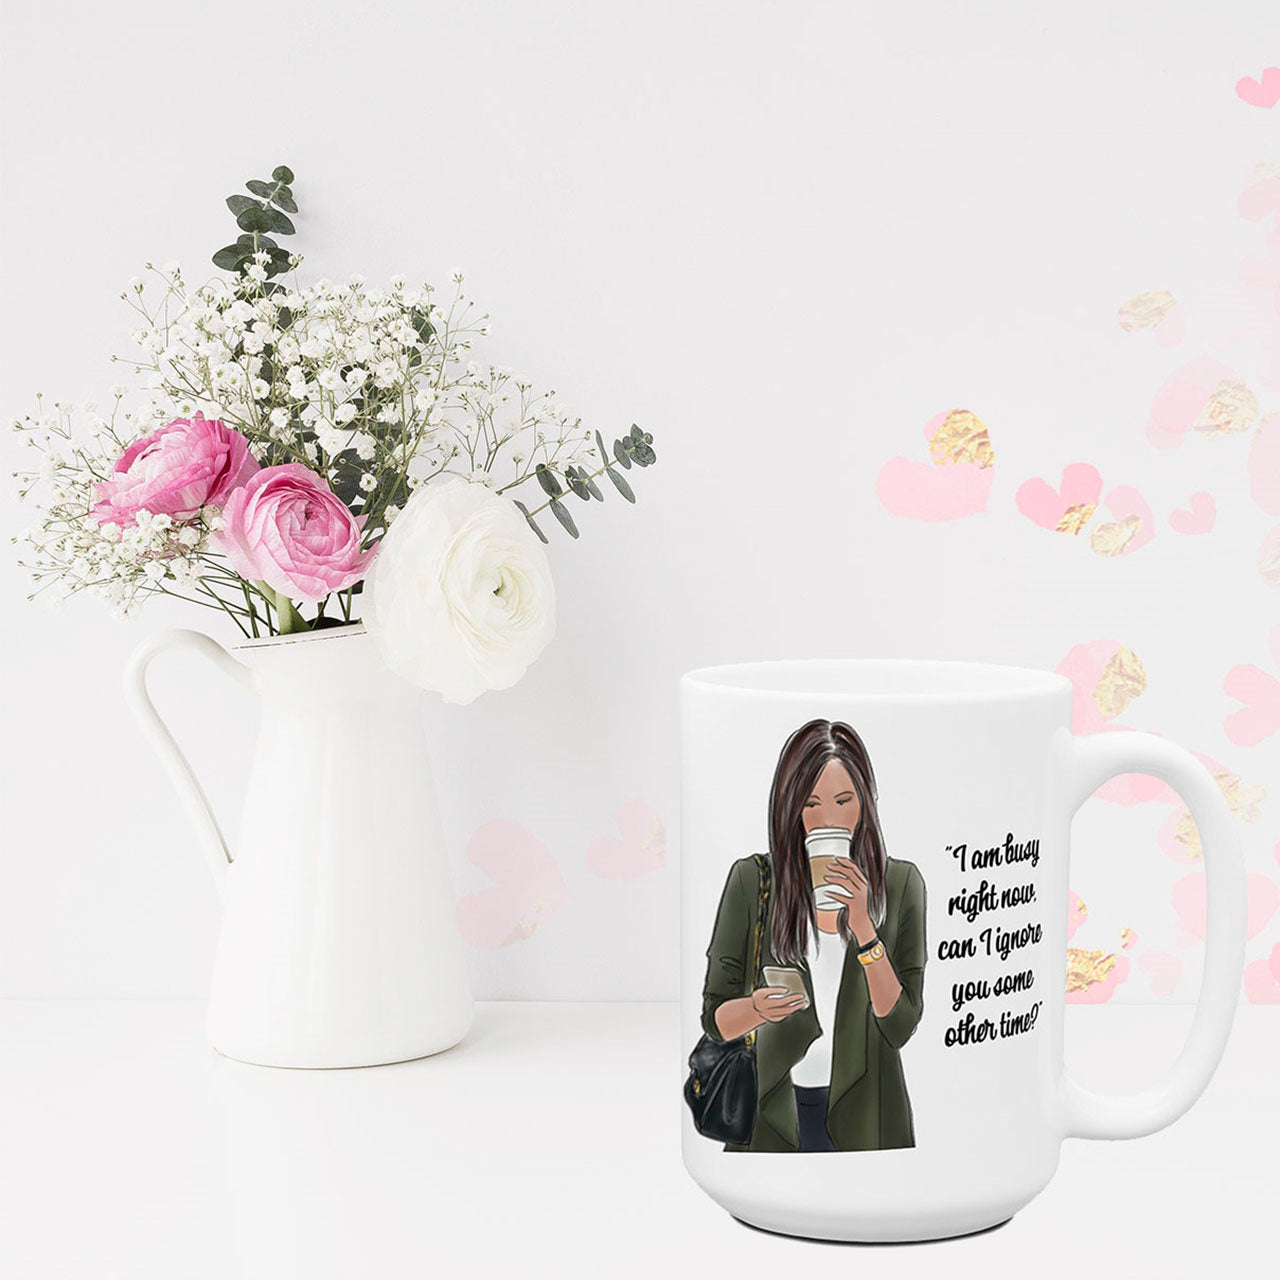 Office Humor Coffee Cup Co Worker Gift Can I Ignore You Some Other Time Gift for Her